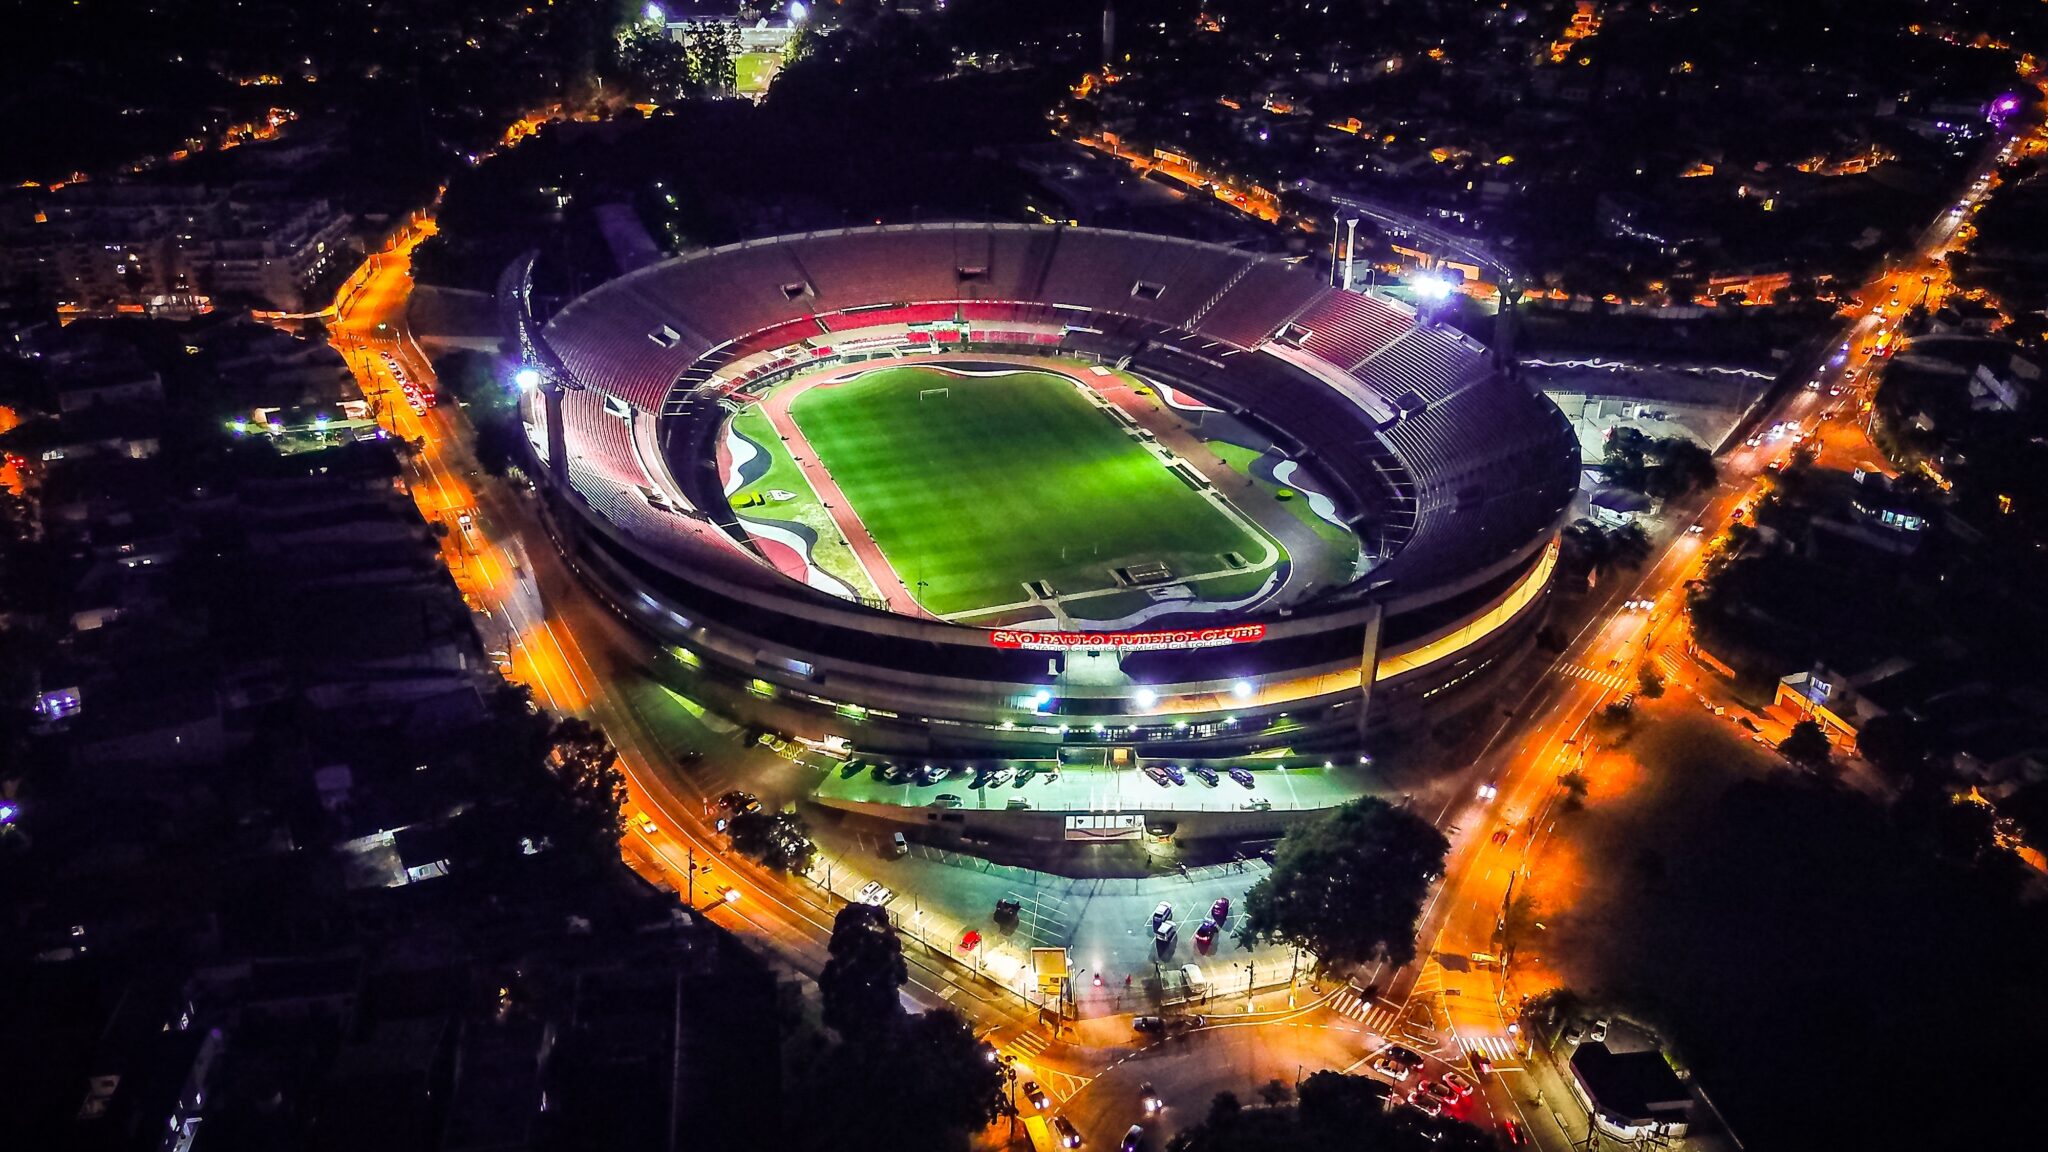 A large stadium lit up at night, as seen from above